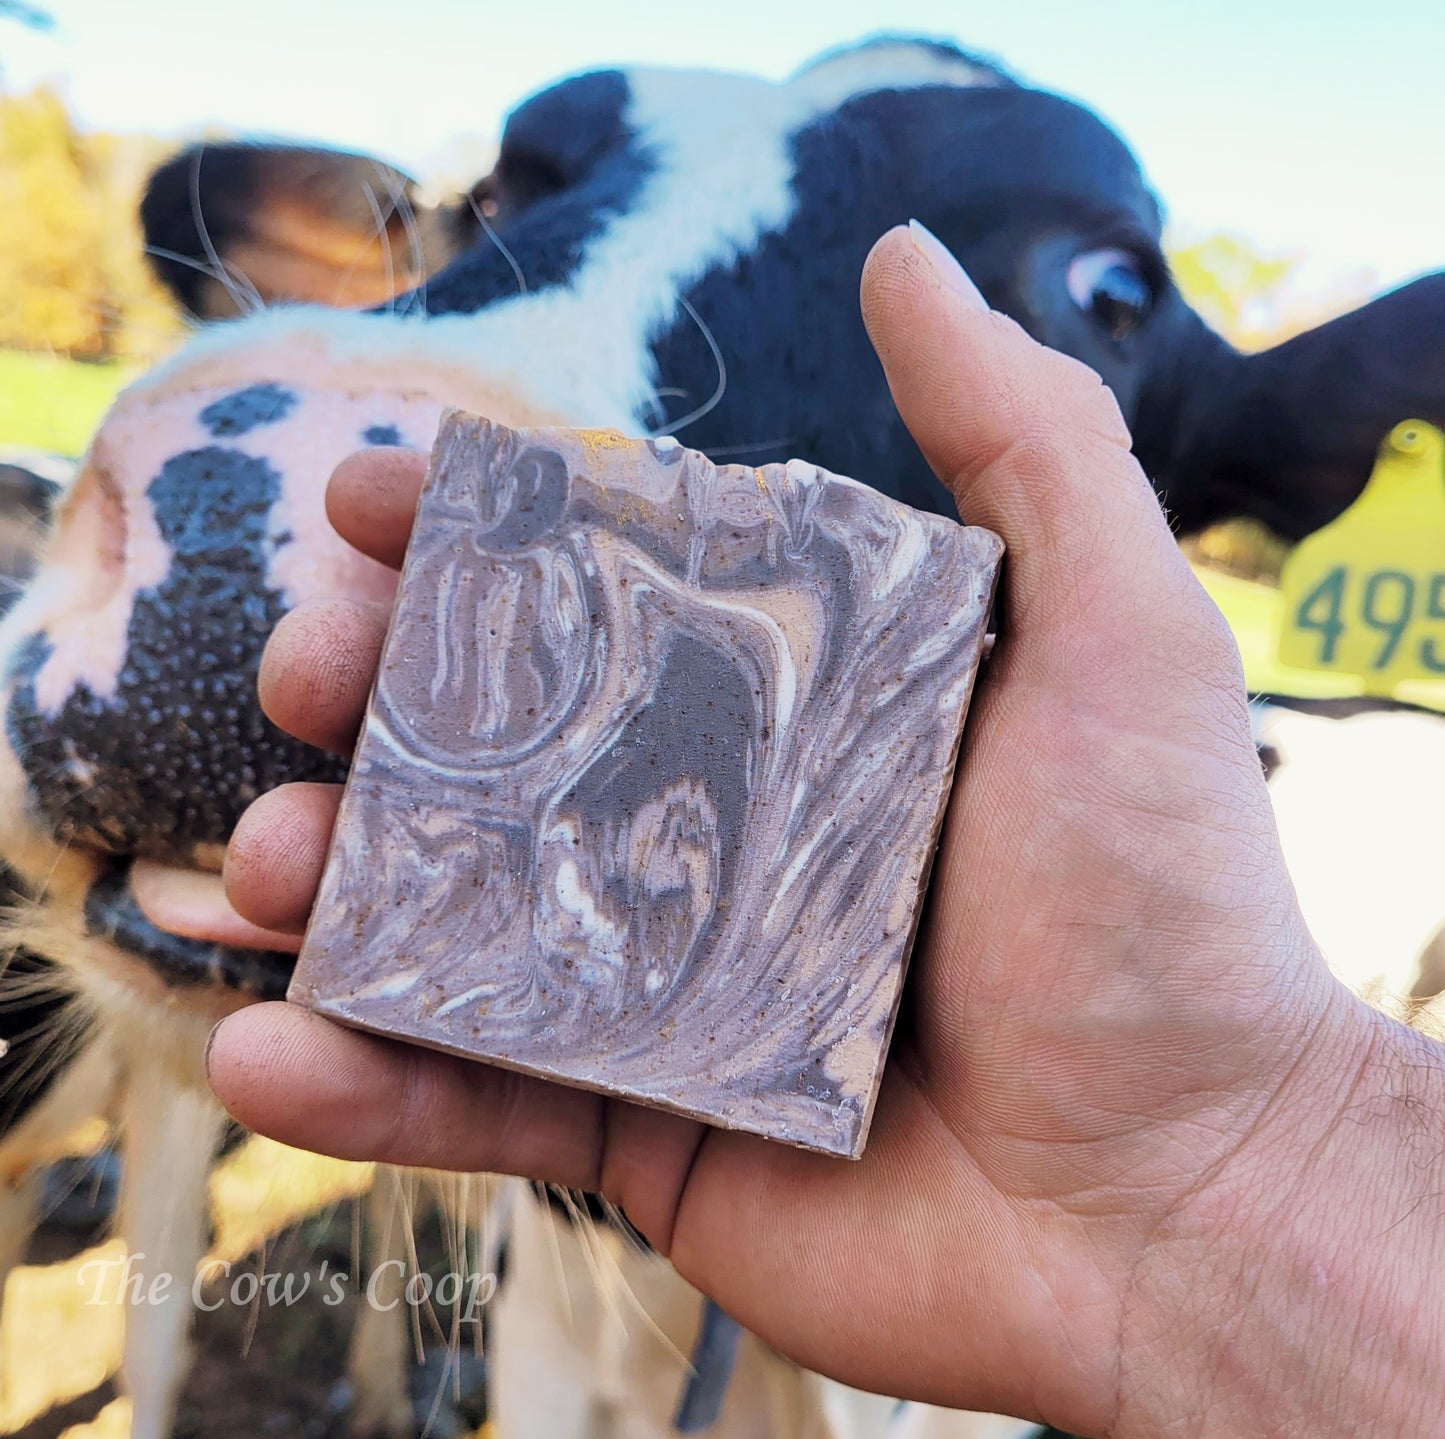 Cows Got Out! (Vanilla and Woods) - Cow Milk Soap